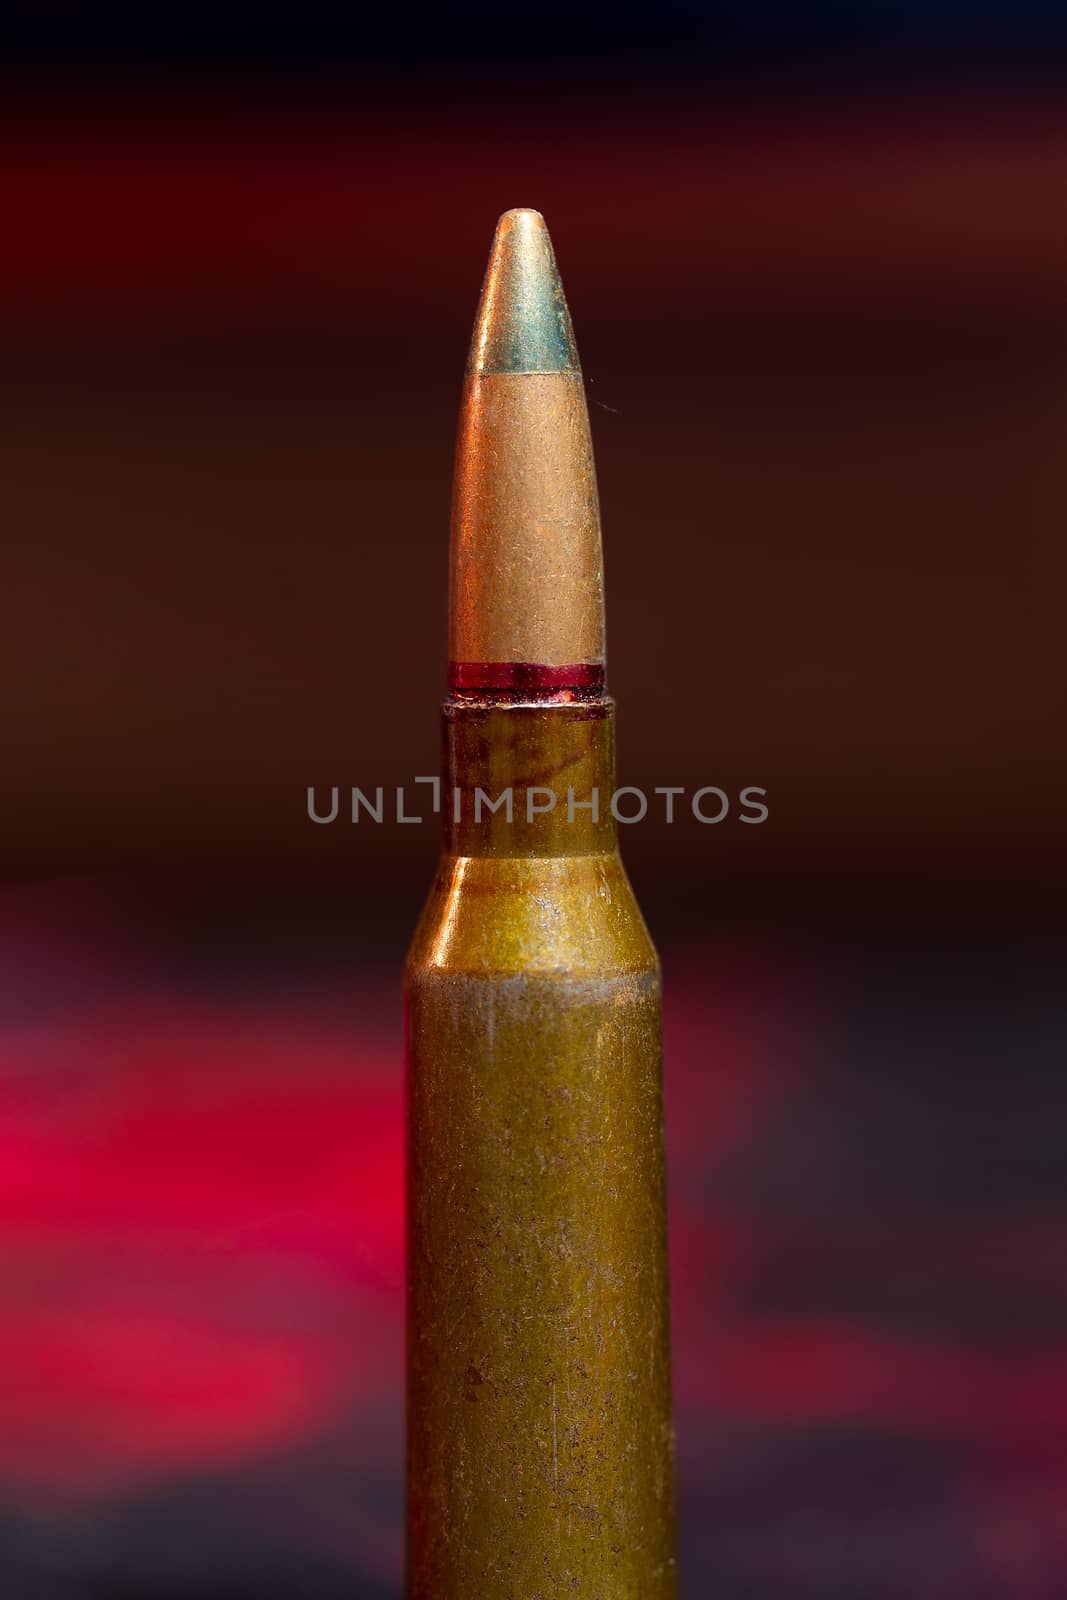 Rifle AK-47 ammo bullet close-up on blurred background. Armor piercing cartridge.